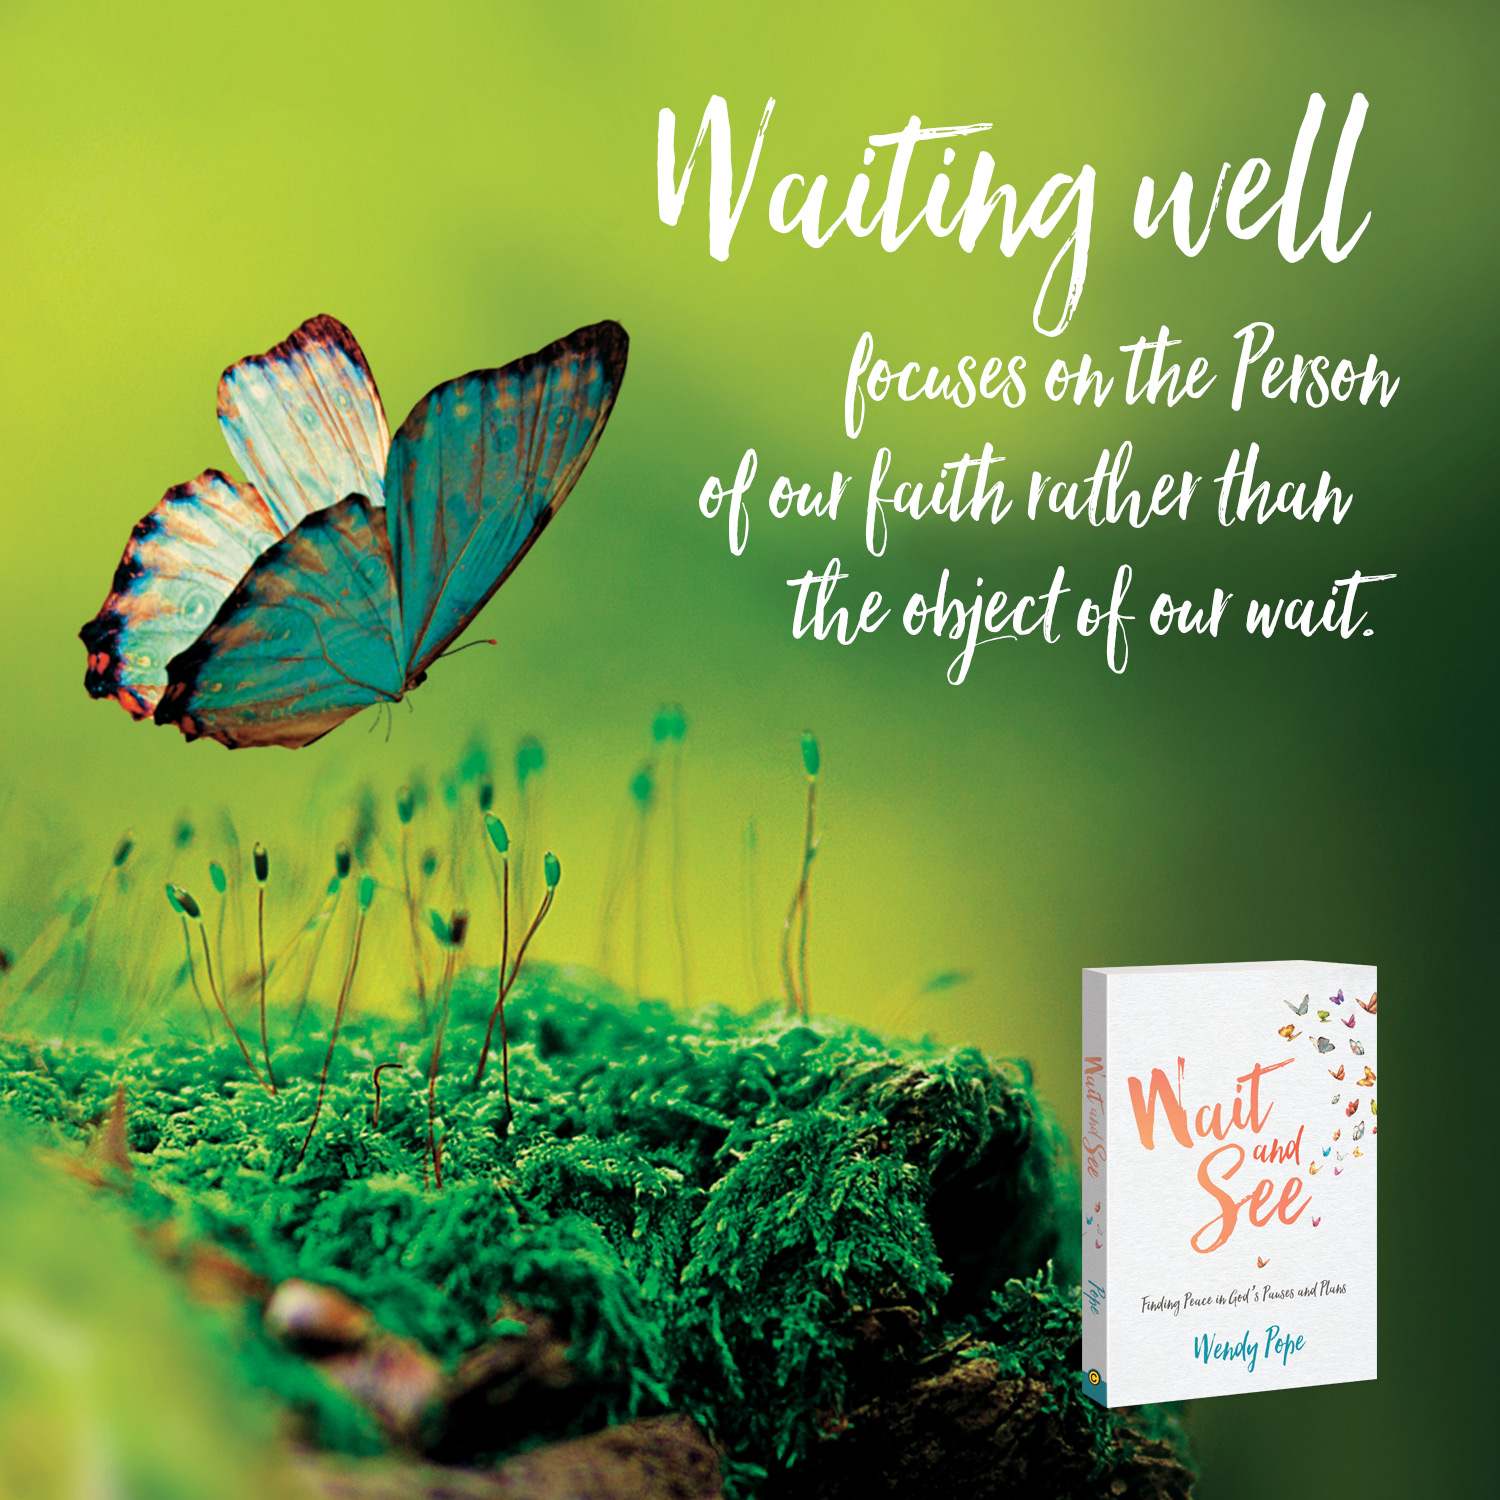 Waiting well focuses on the Person of our Faith rather than the object of our wait.